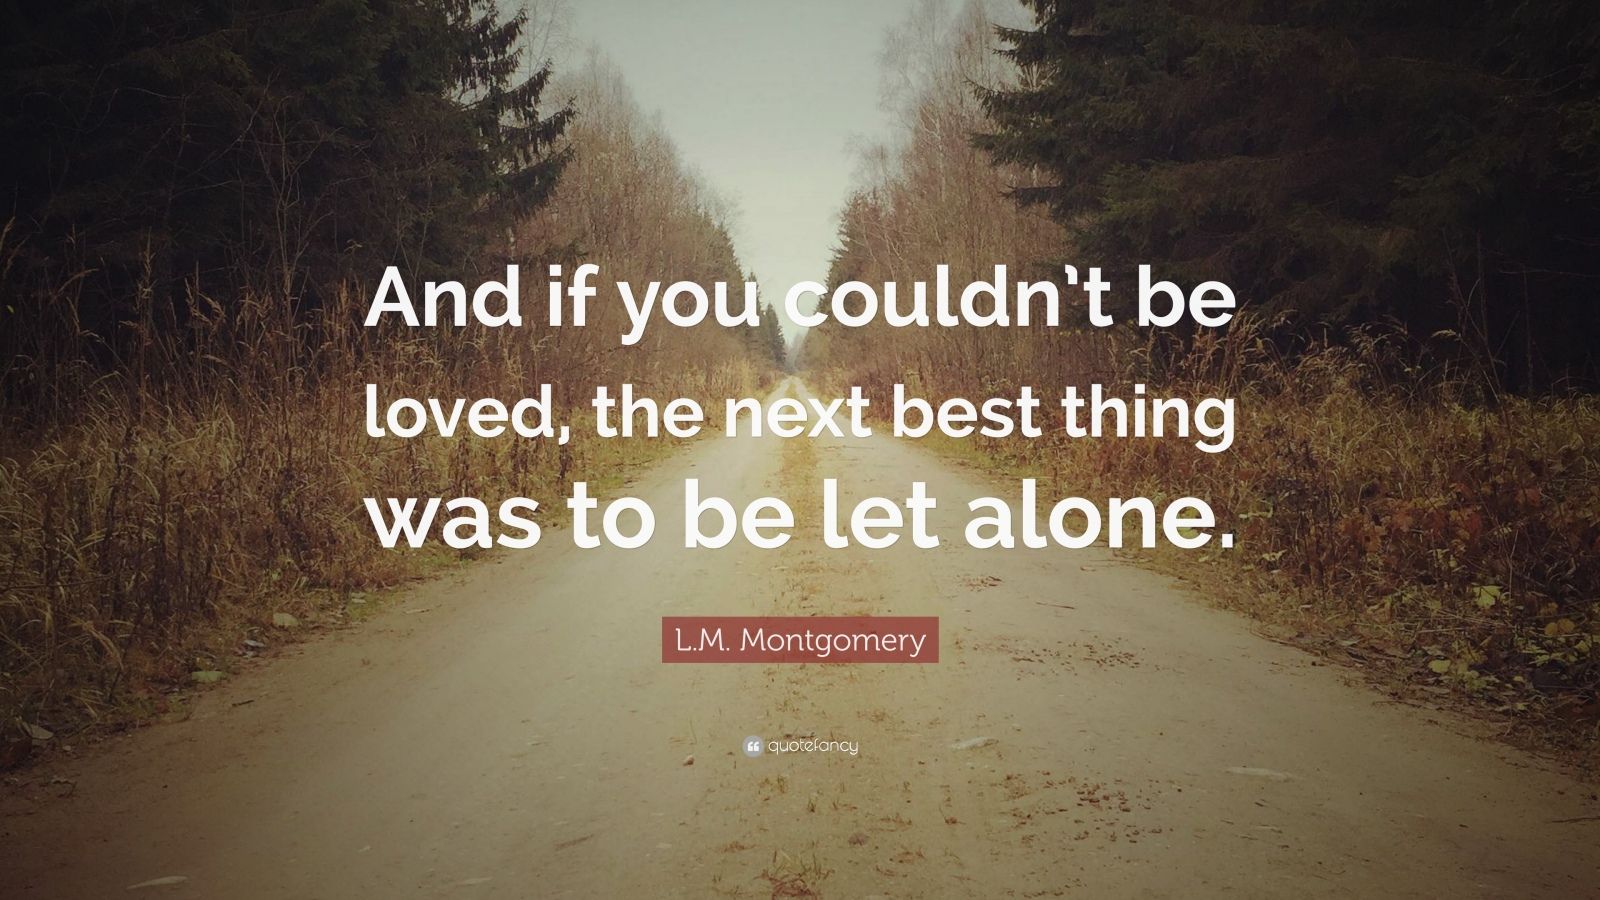 L.M. Montgomery Quote: “And if you couldn’t be loved, the next best ...